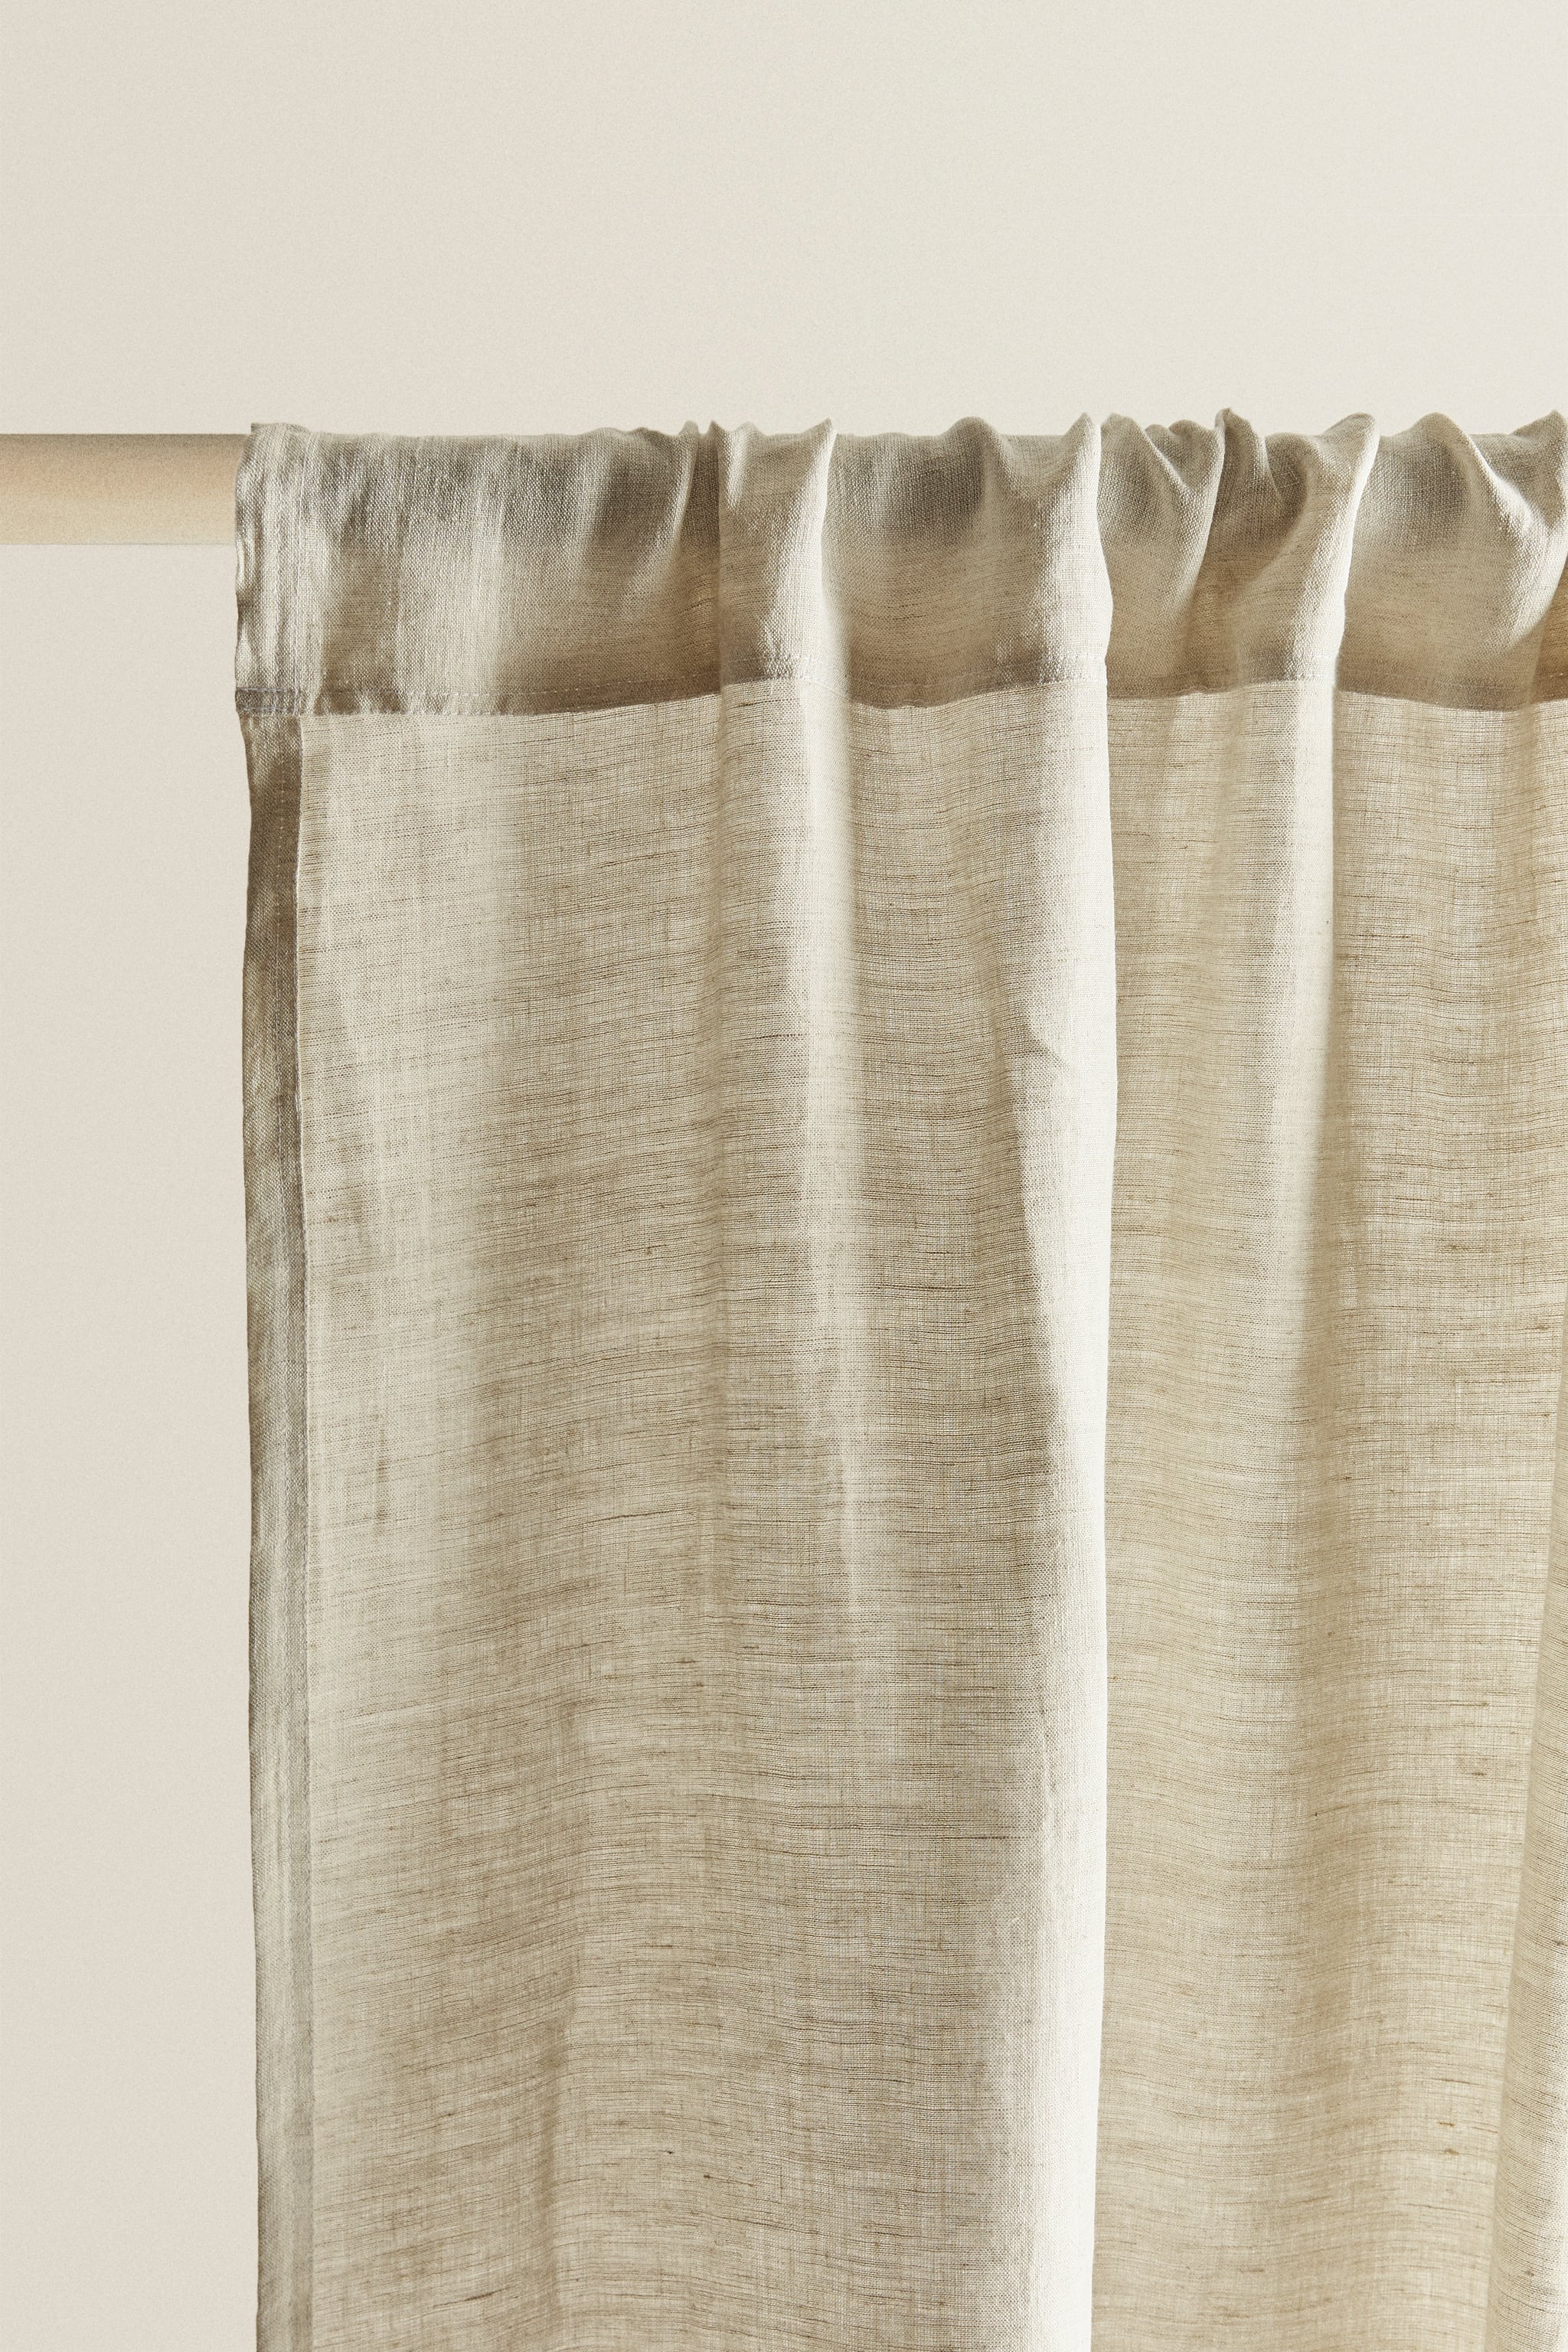 WASHED LINEN CURTAIN 55.1" x 106.3"